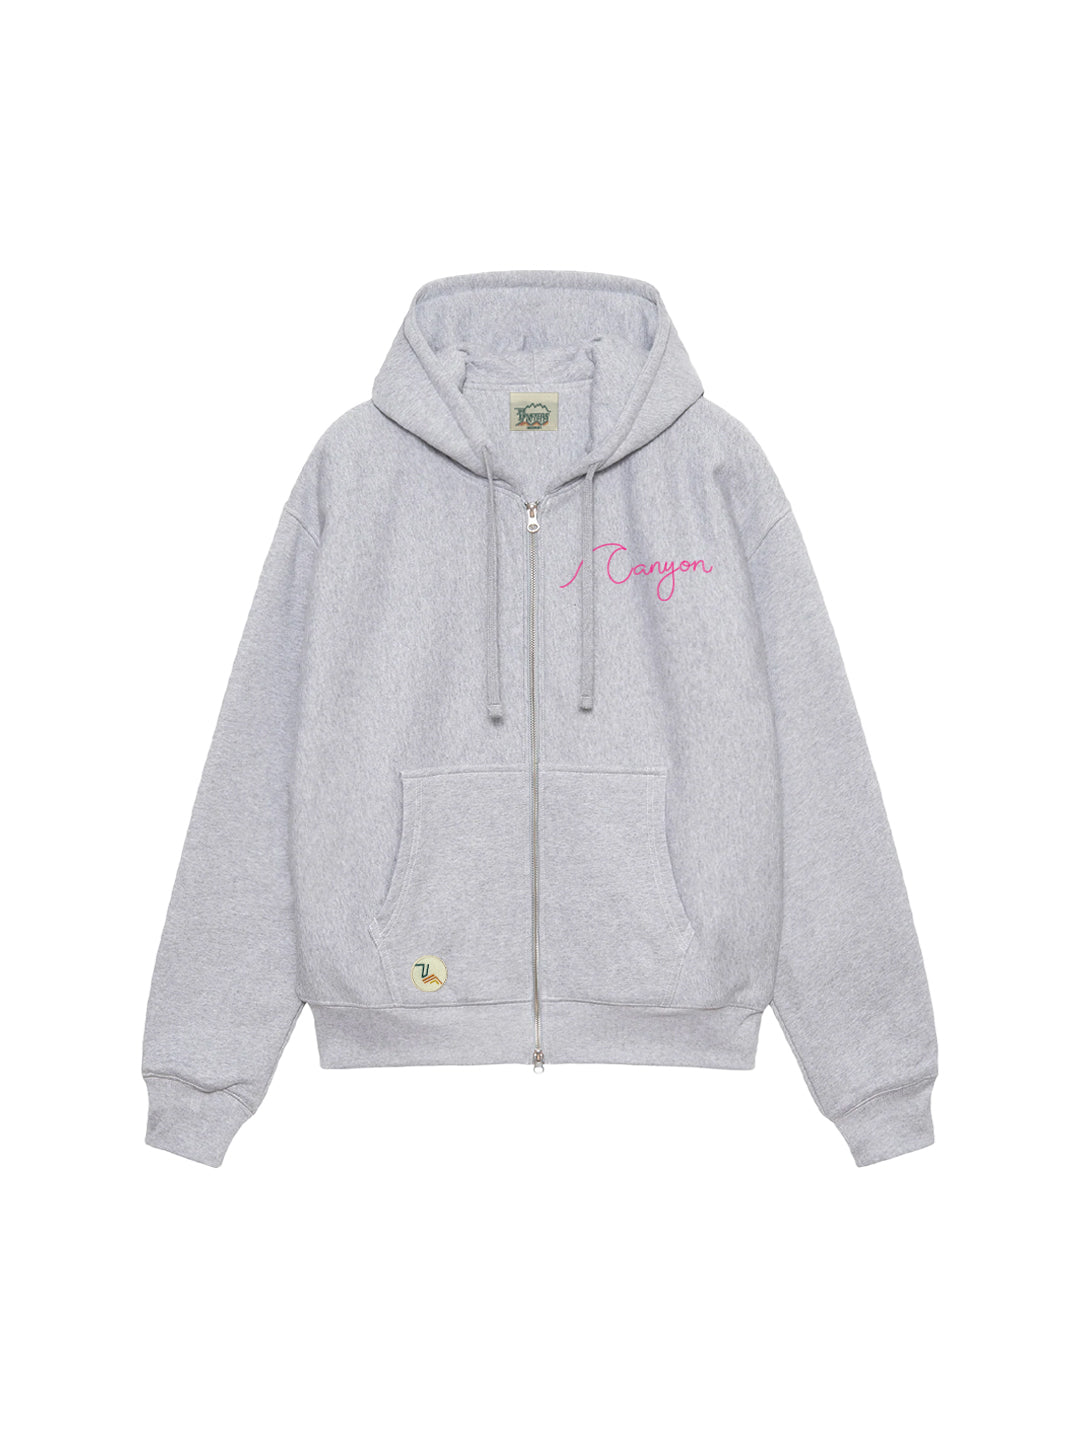 Canyon Wave Adult Zip Hoodie in Grey